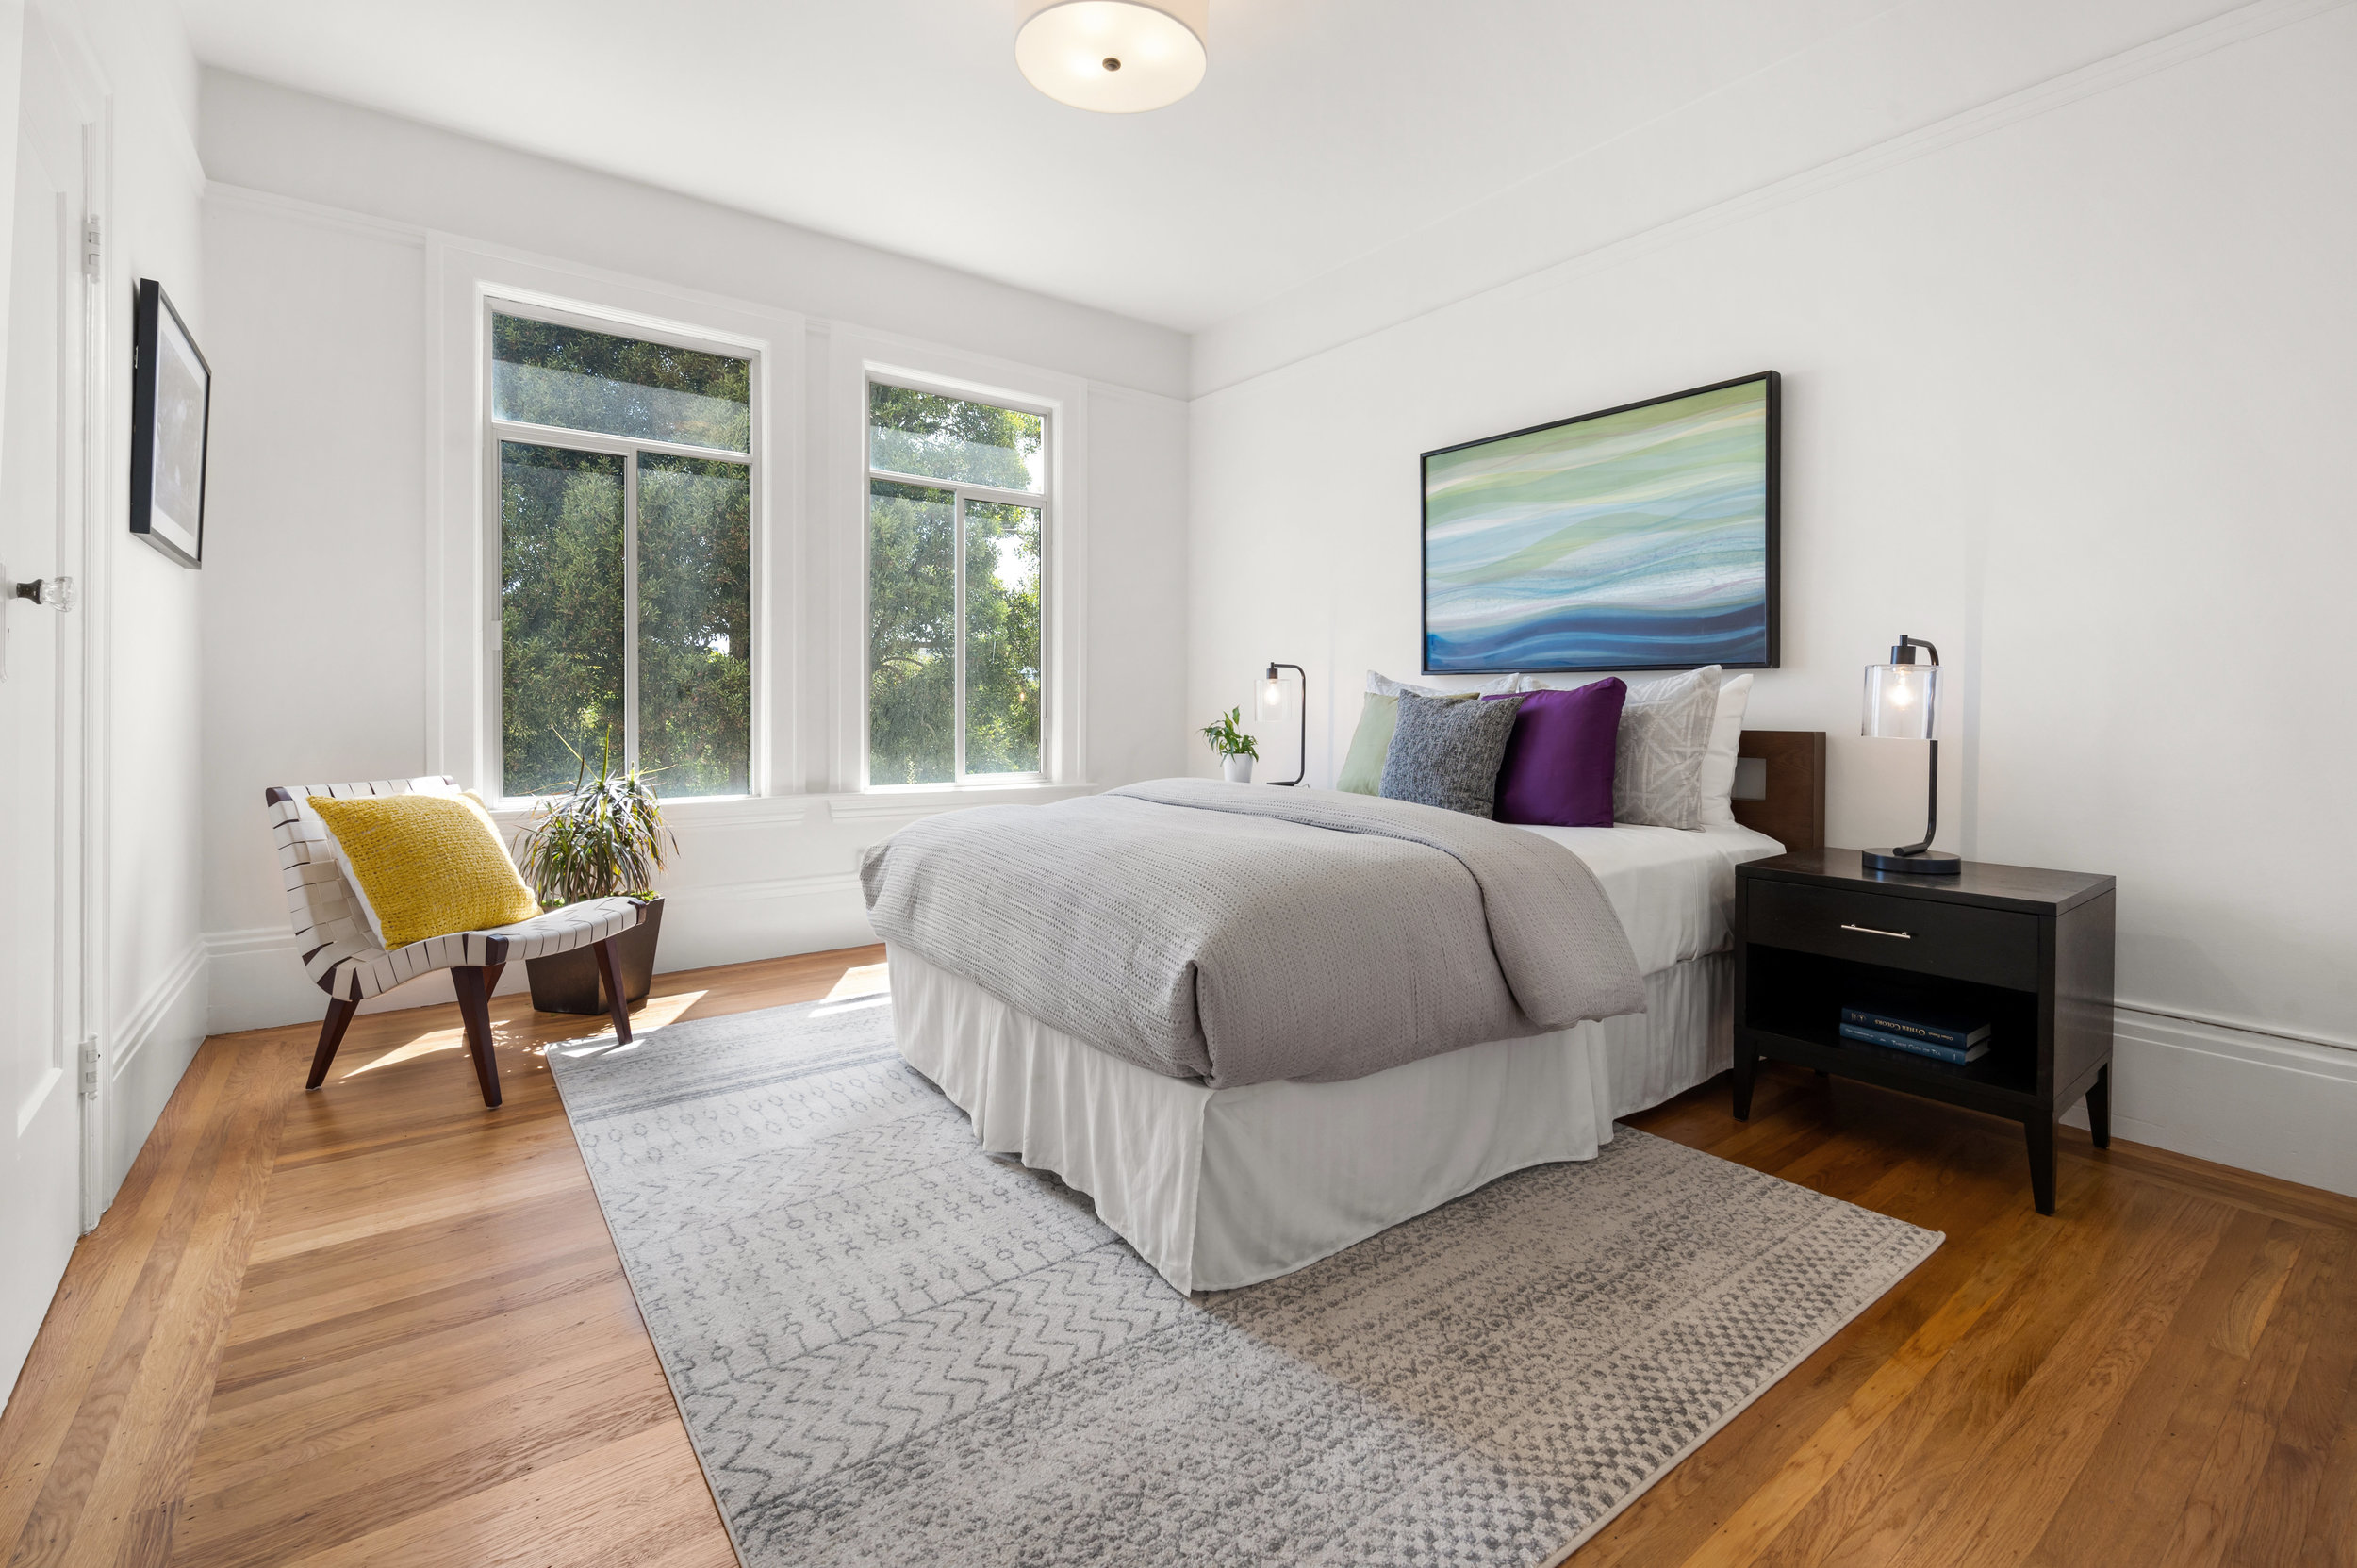 Property Photo: Bedroom three, featuring wood floors and two large windows